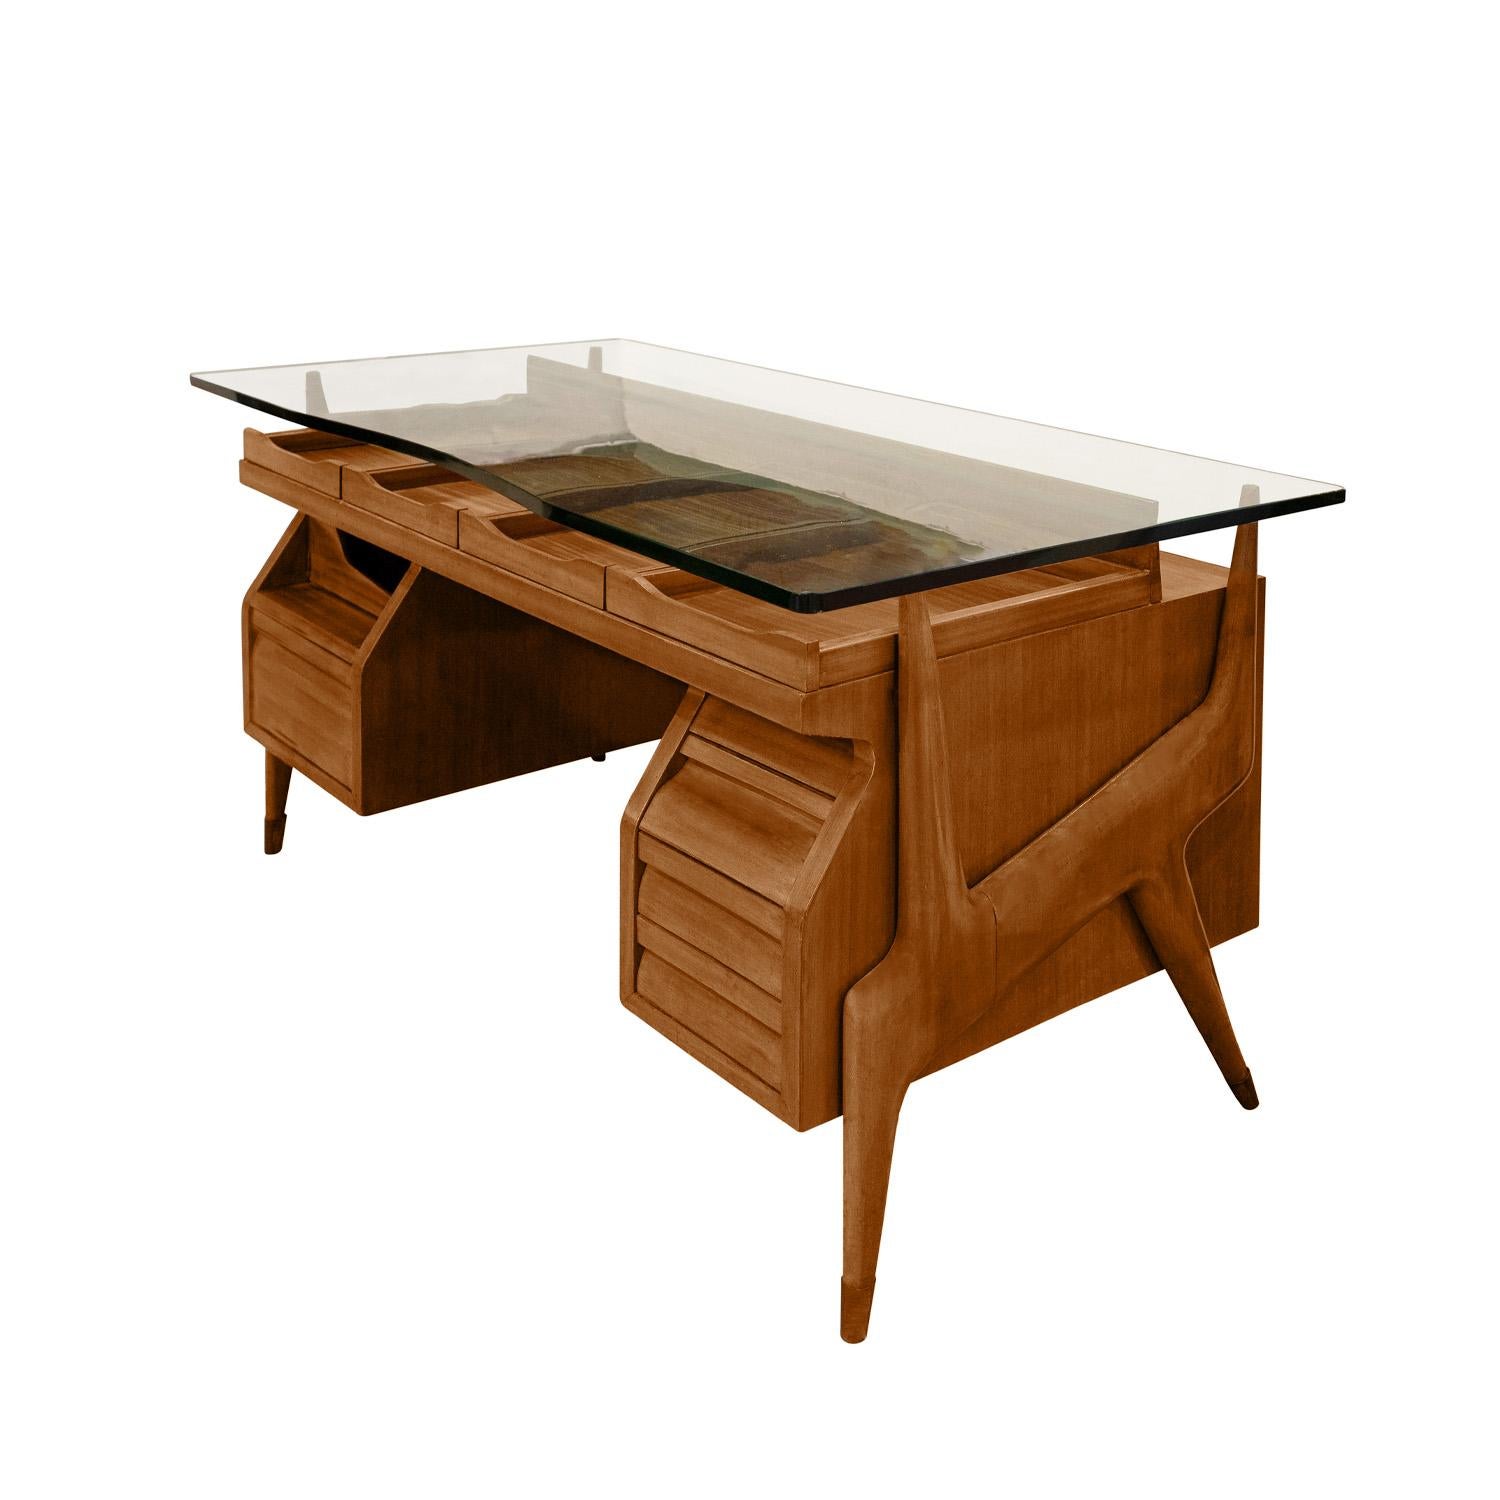 Mid-Century Modern Ico Parisi Attributed Sculptural Desk With Glass Top 1950s For Sale